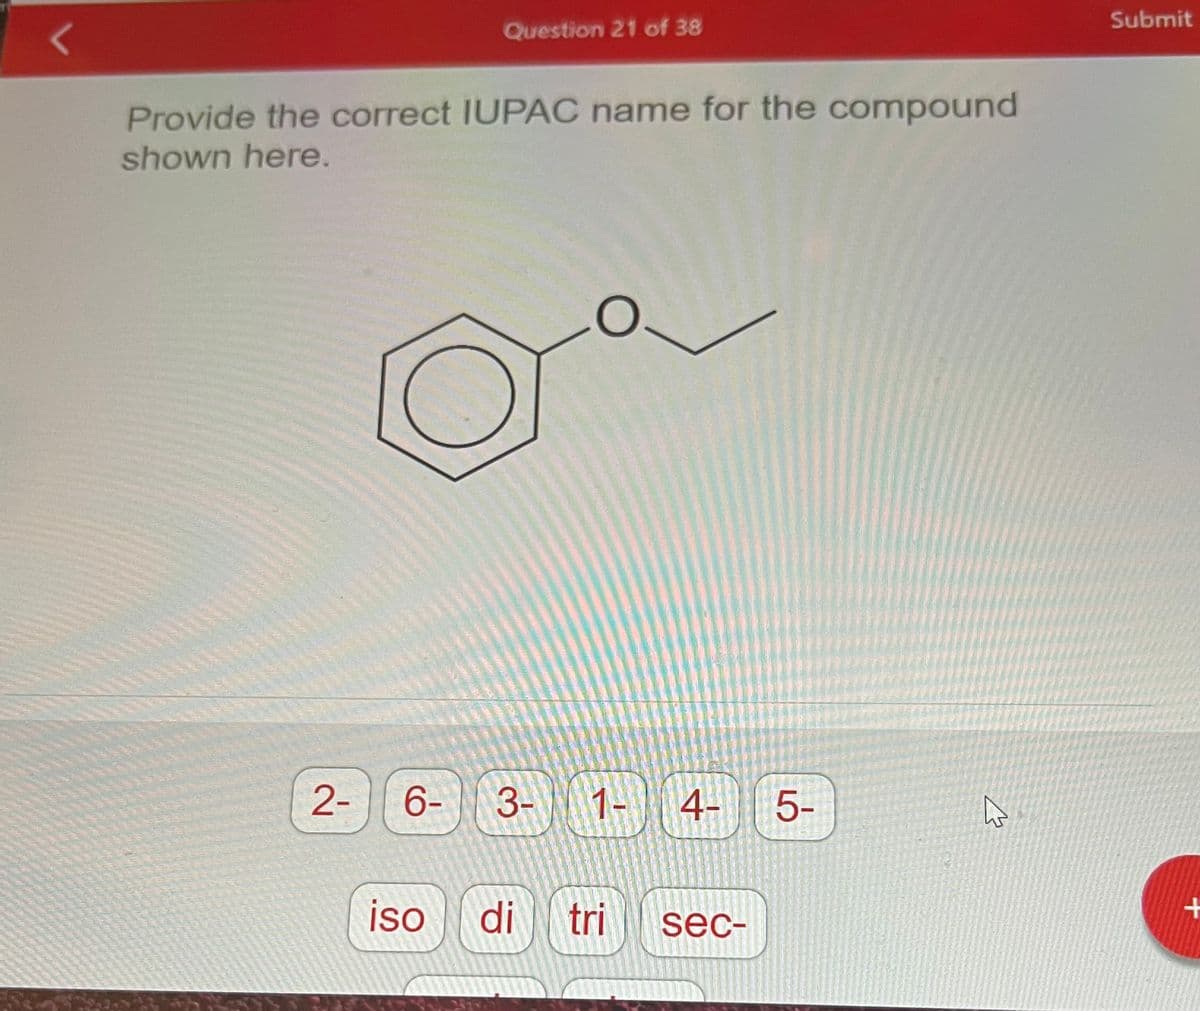 Provide the correct IUPAC name for the compound
shown here.
2-
6-
Question 21 of 38
iso
3-
di
1- 4- 5-
tri sec-
☆
Submit
+